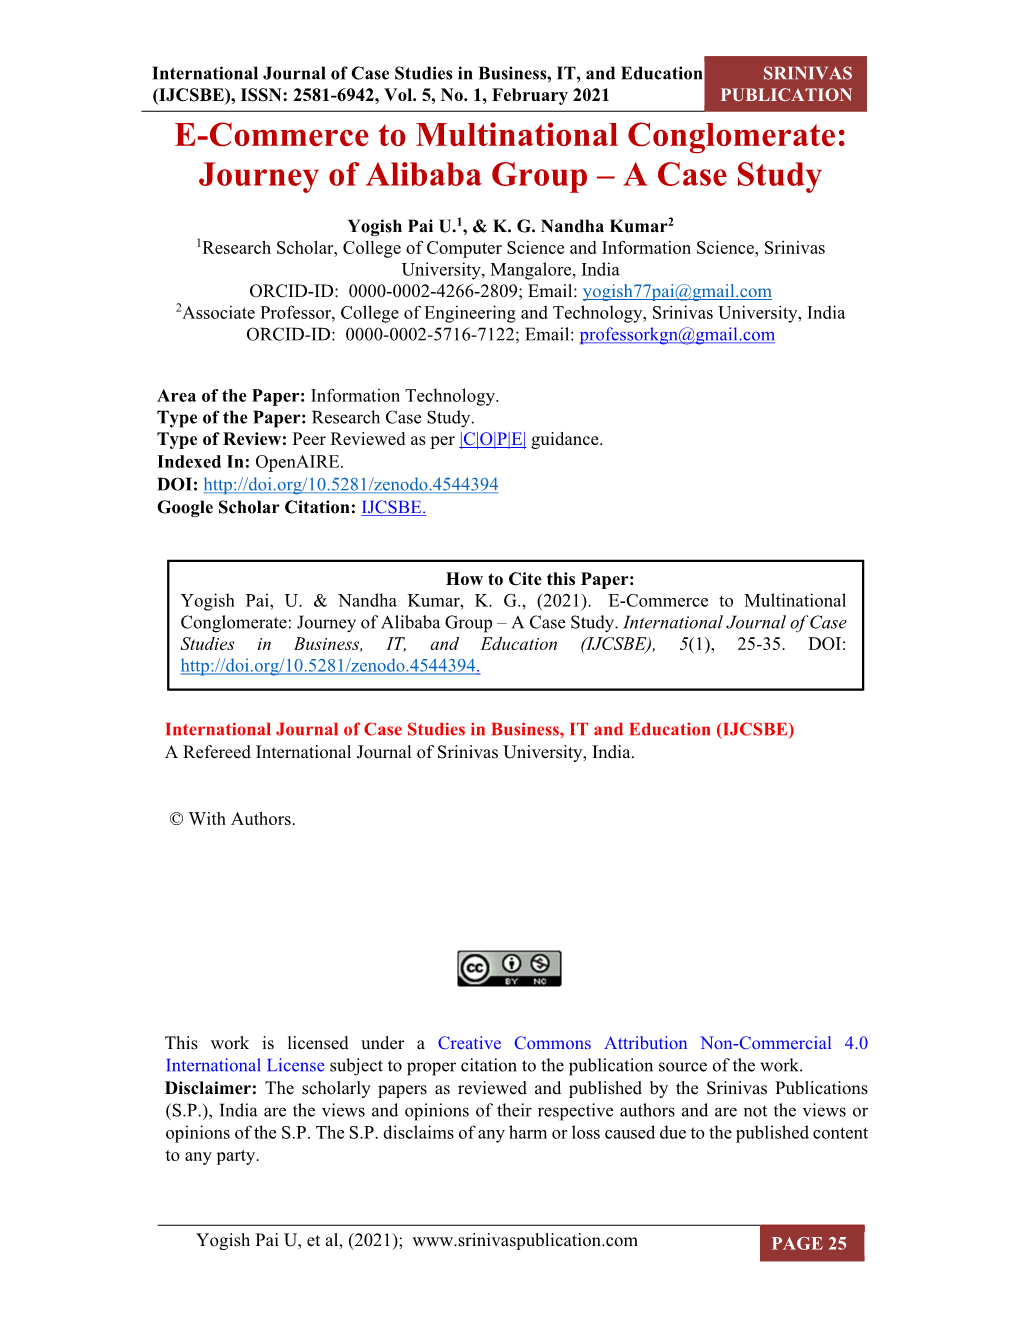 E-Commerce to Multinational Conglomerate: Journey of Alibaba Group – a Case Study